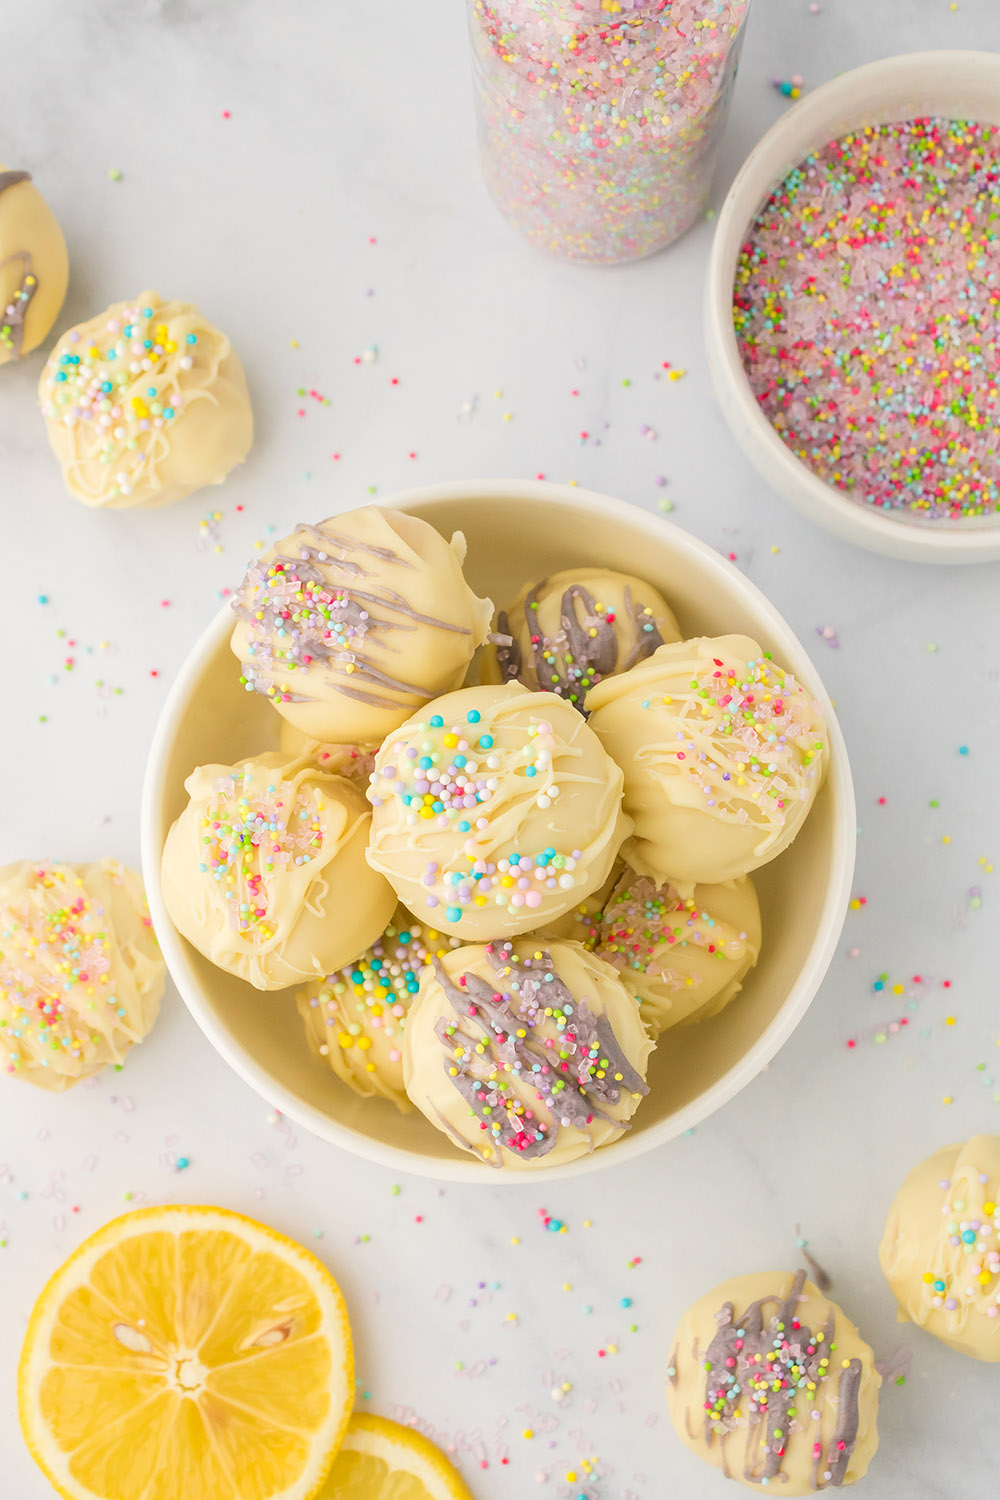 Bowl of lemon truffles with spring decorations.